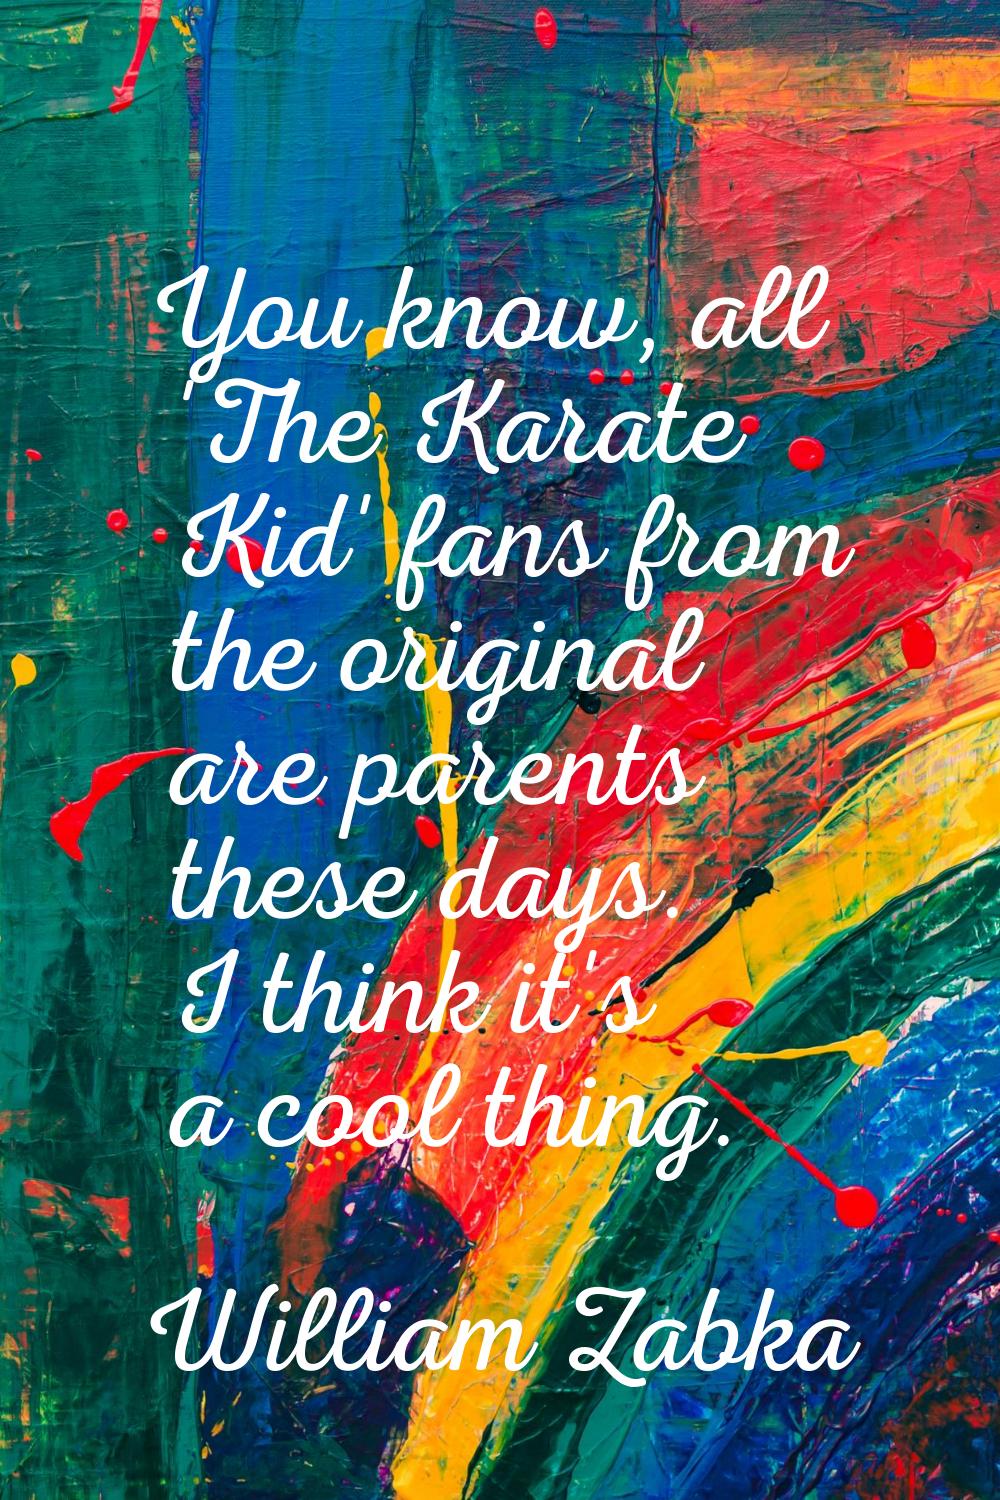 You know, all 'The Karate Kid' fans from the original are parents these days. I think it's a cool t